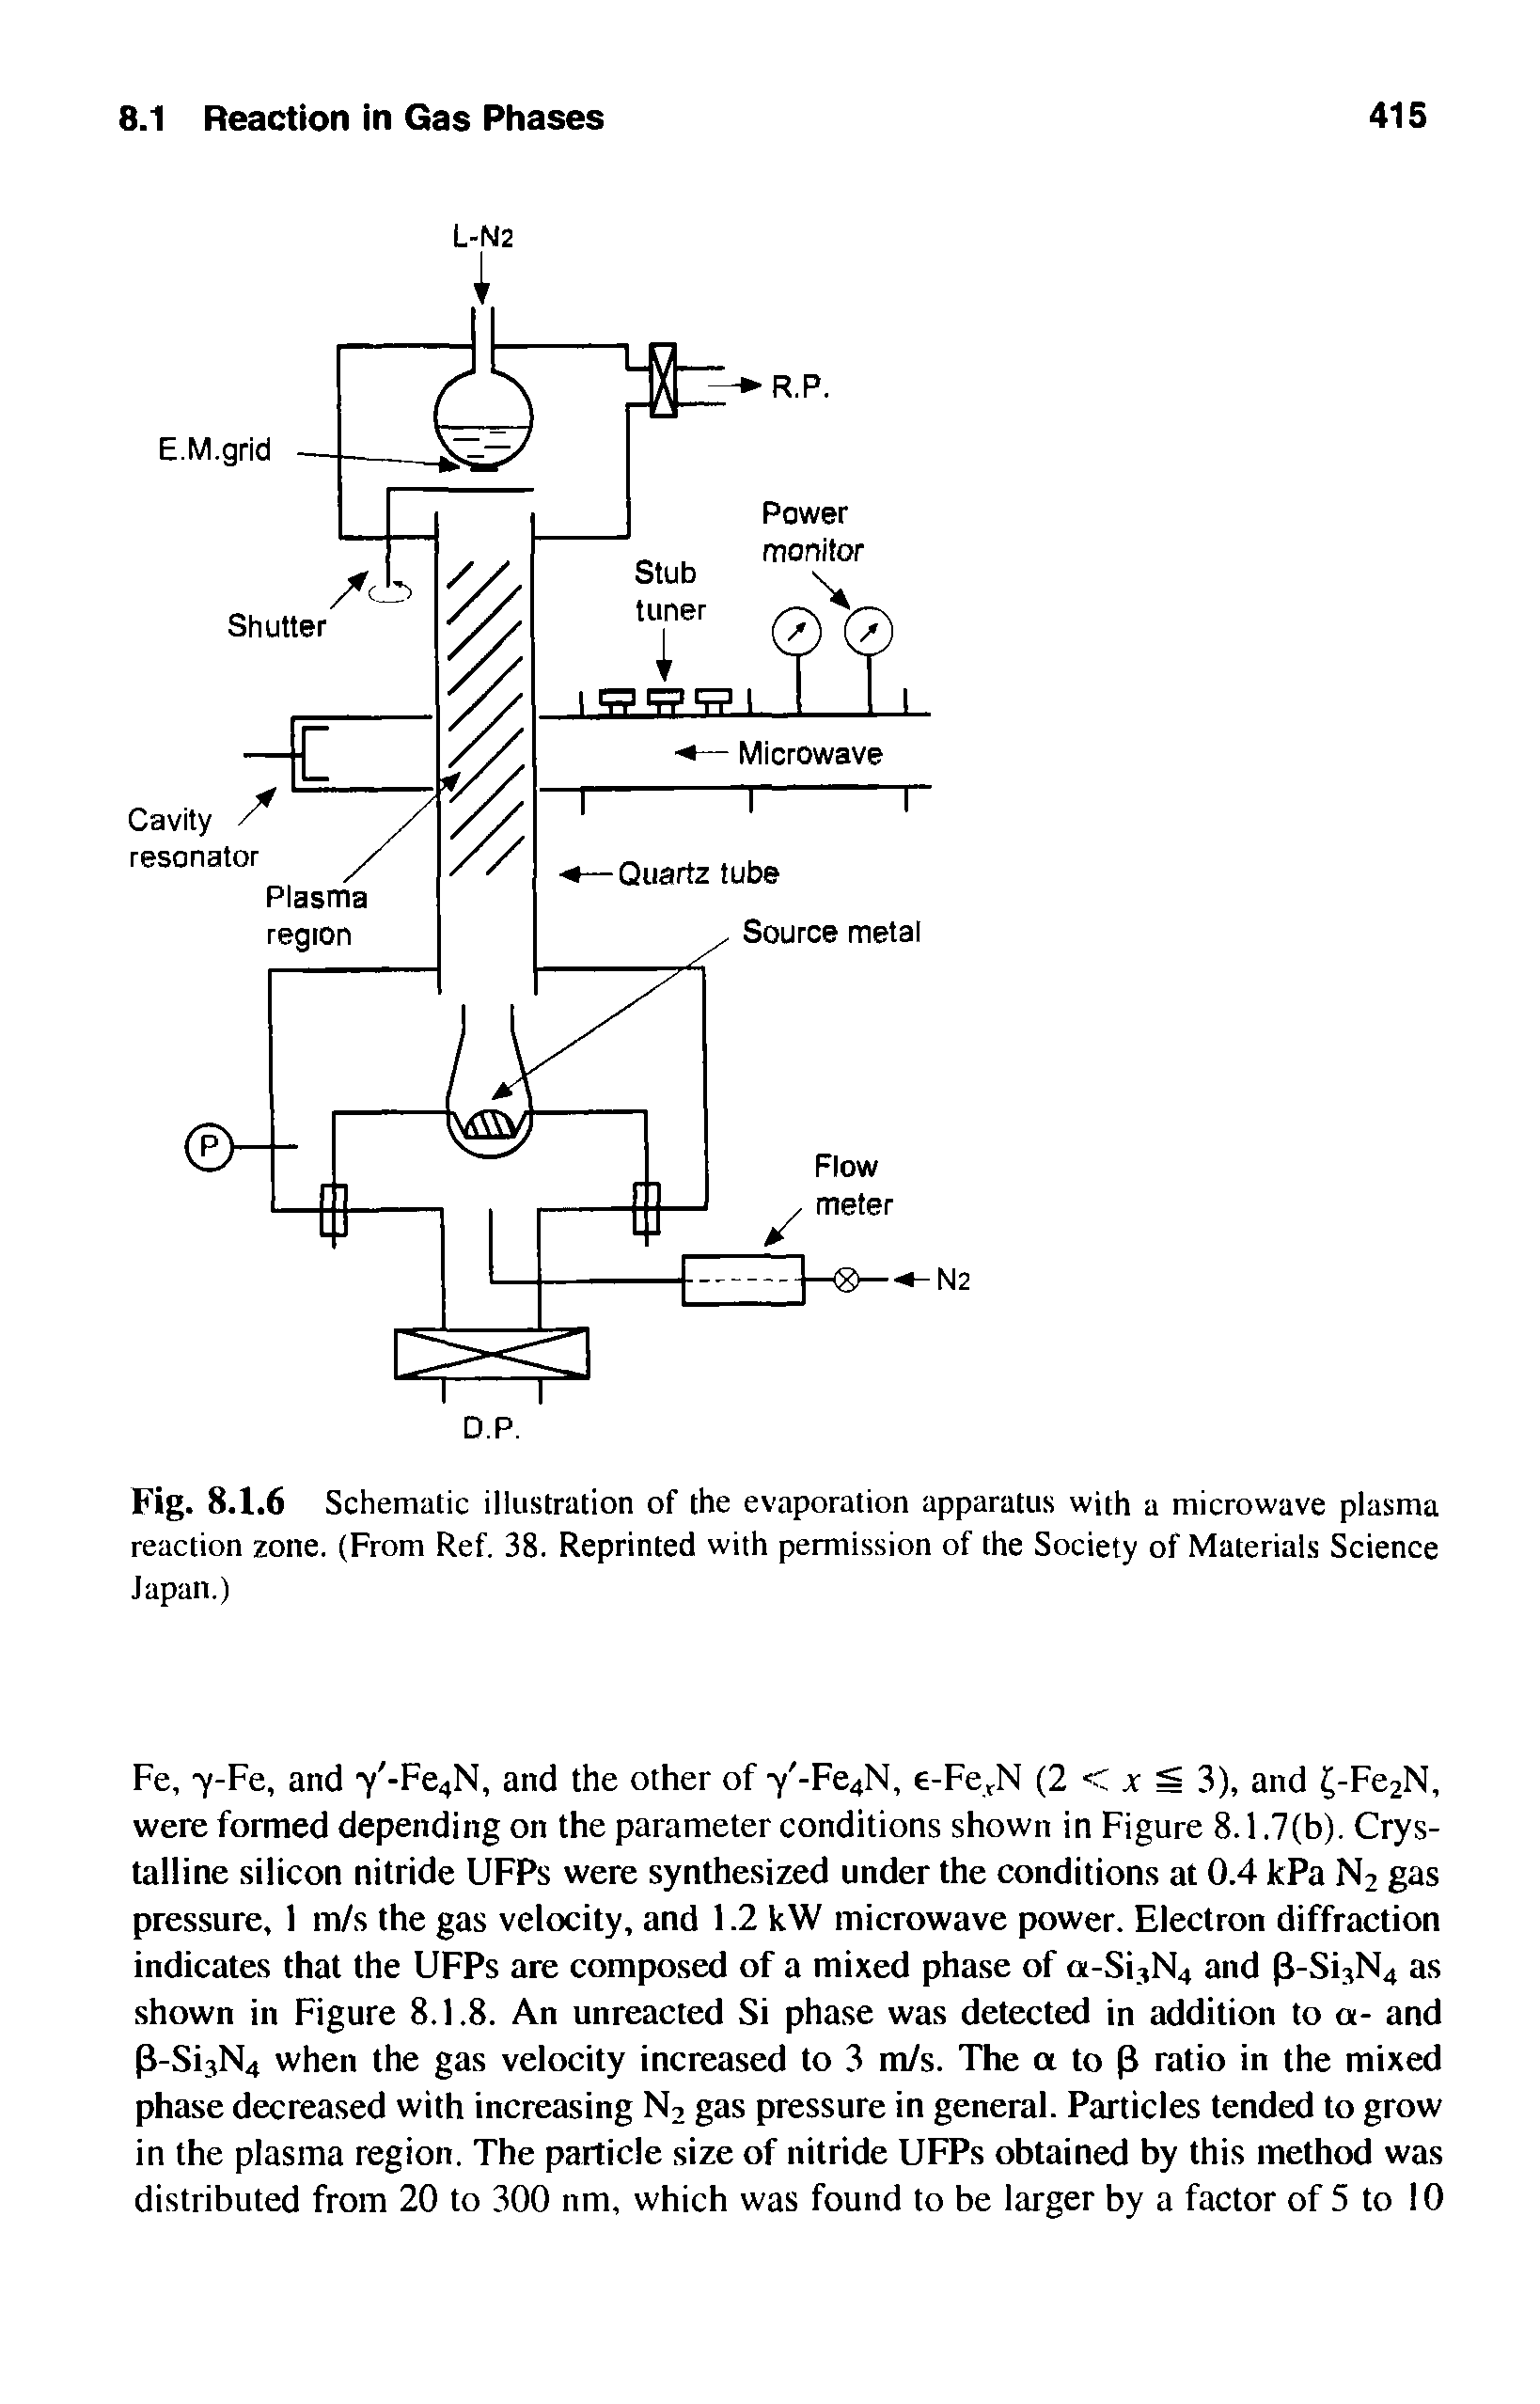 Fig. 8.1.6 Schematic illustration of the evaporation apparatus with a microwave plasma reaction zone. (From Ref. 38. Reprinted with permission of the Society of Materials Science Japan.)...